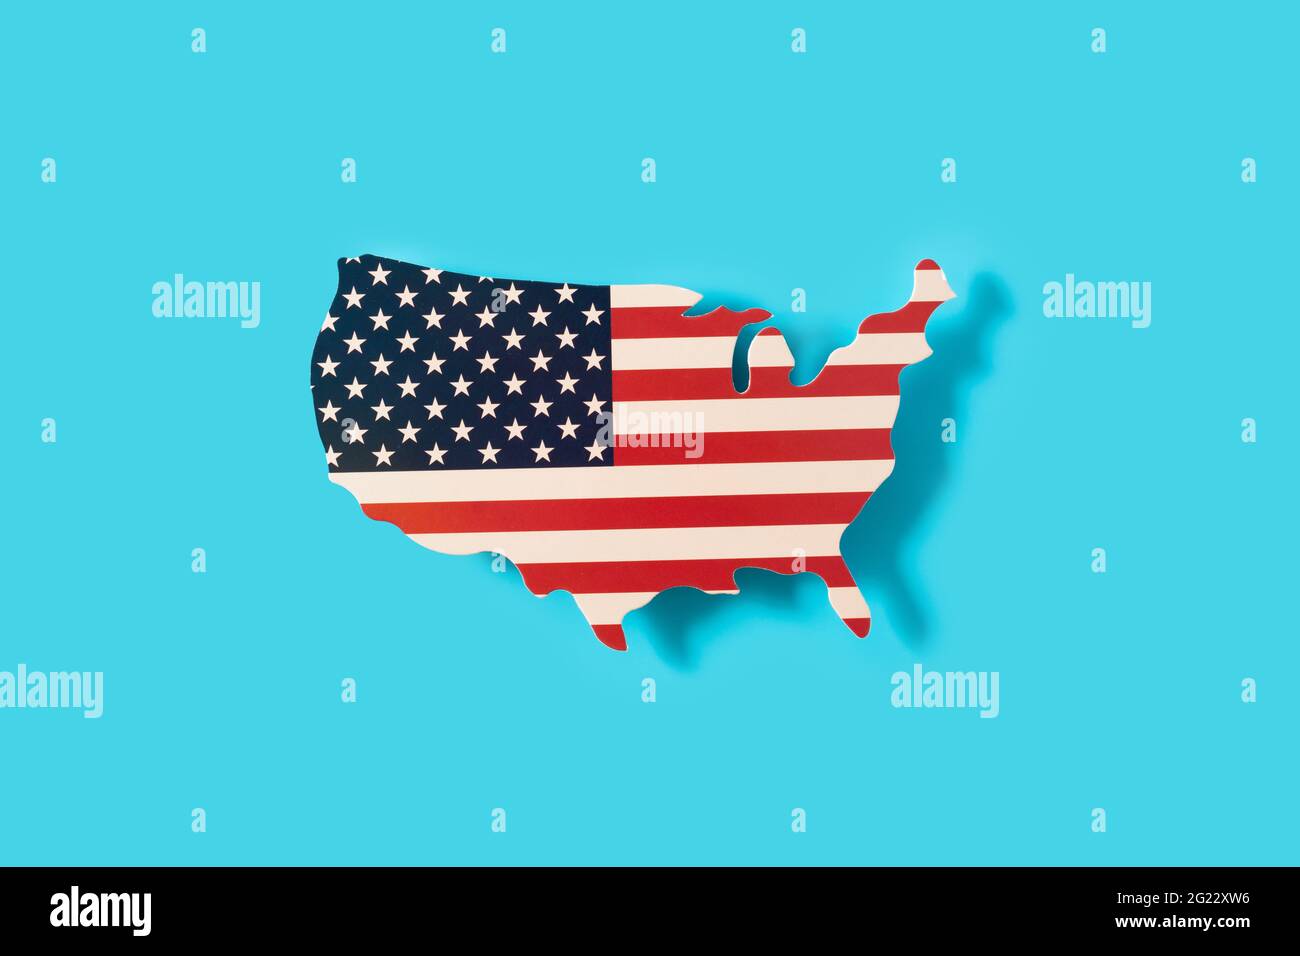 American flag on a map of the USA on blue background Stock Photo